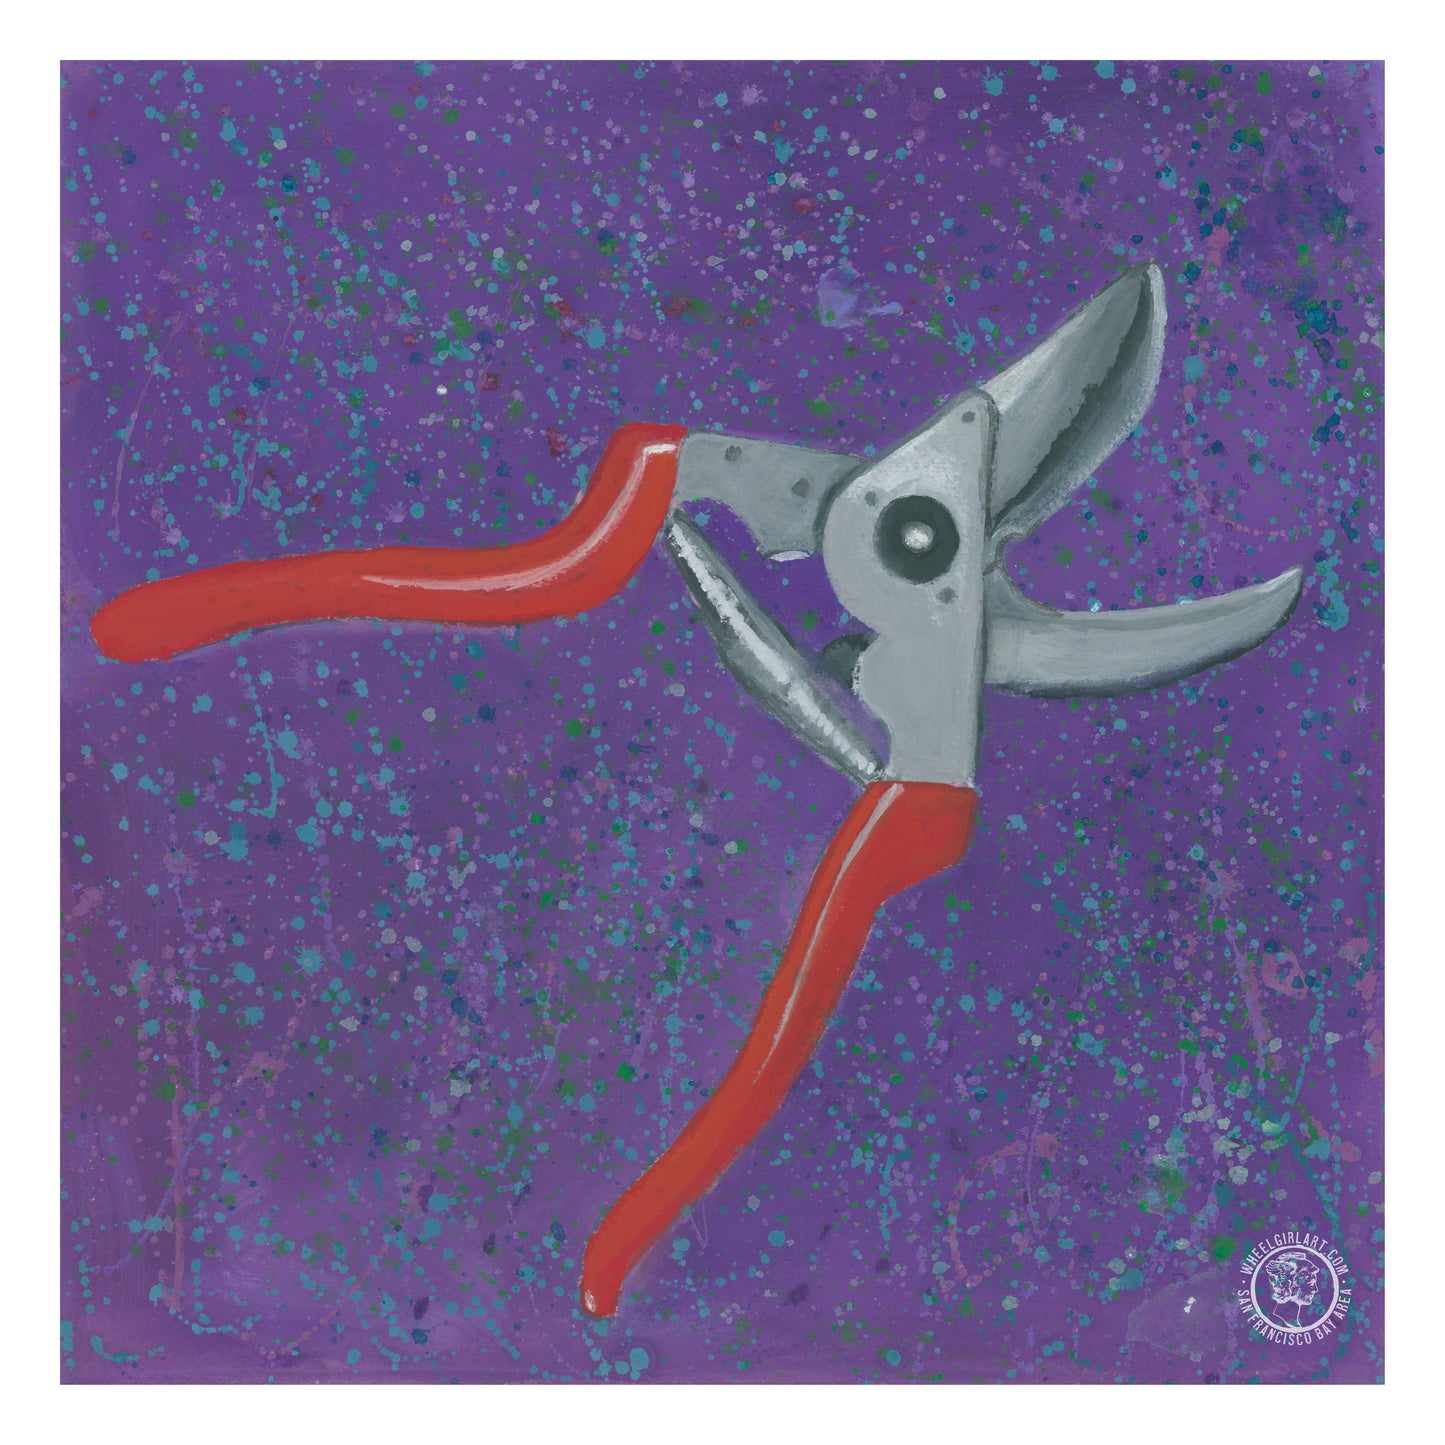 Faces of Tools: Garden Pruning Shears PHYSICAL PRINT